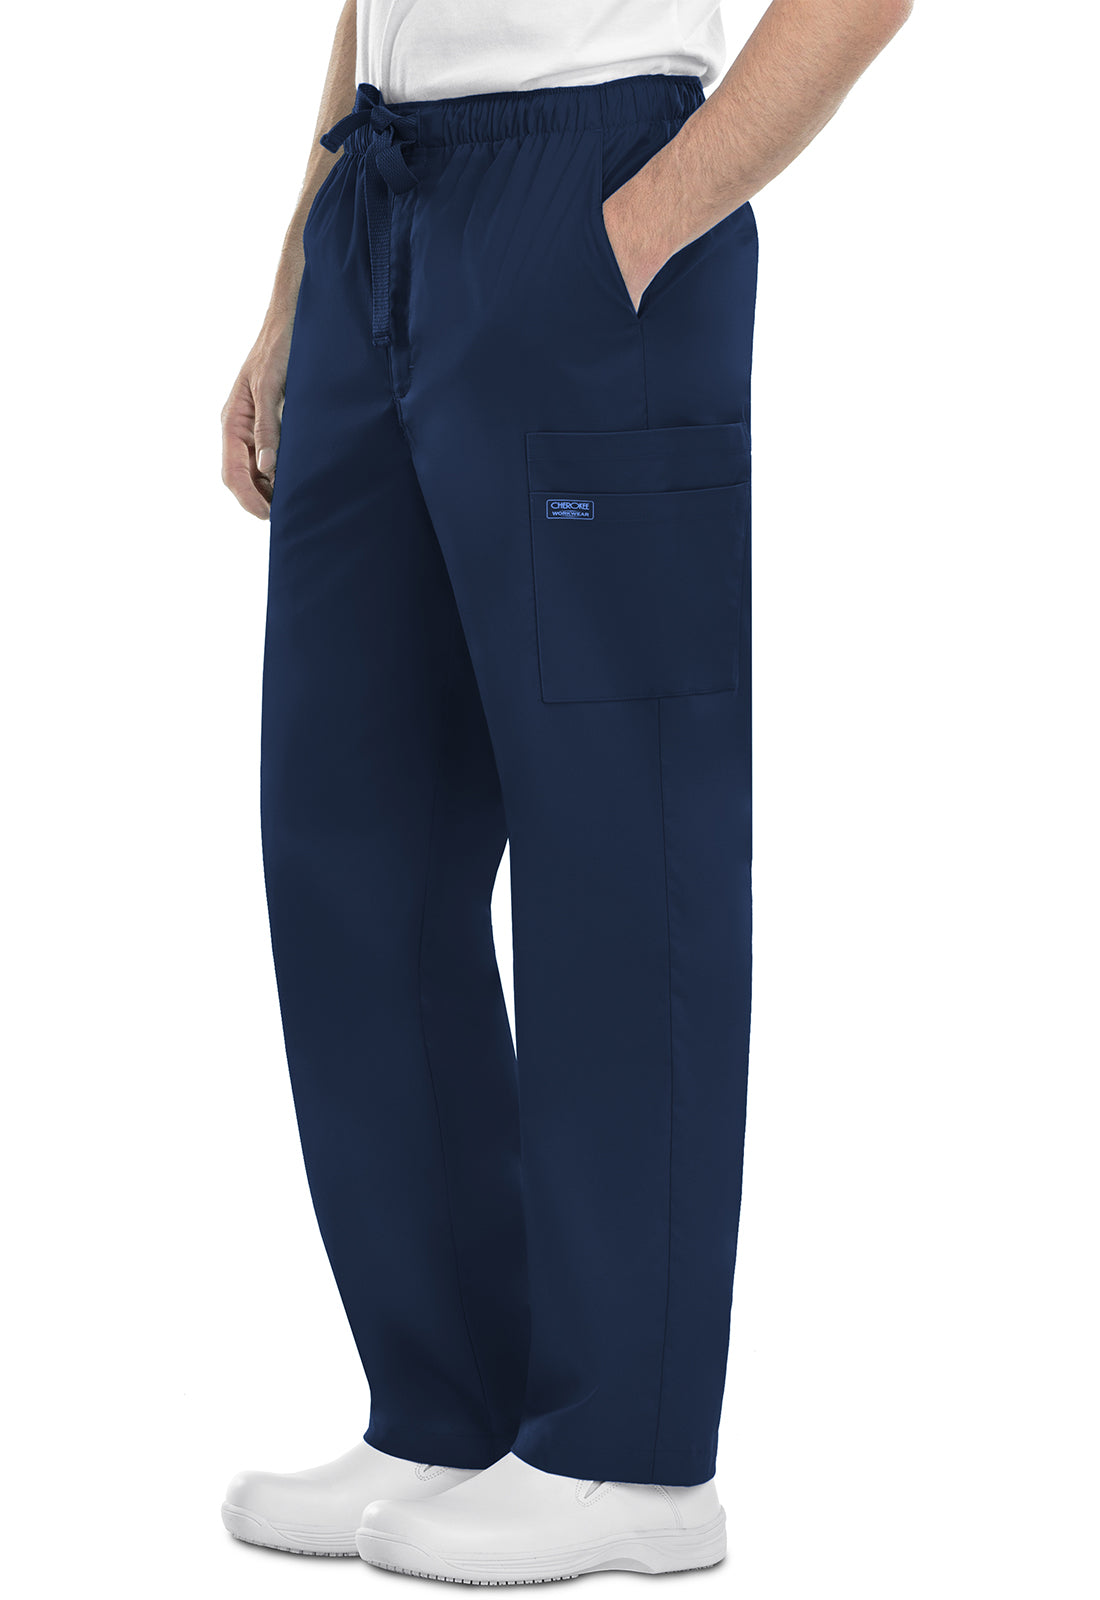 OUT Exist. Conj. Hombre Cherokee Core Stretch Mod.4725/4243 Navy